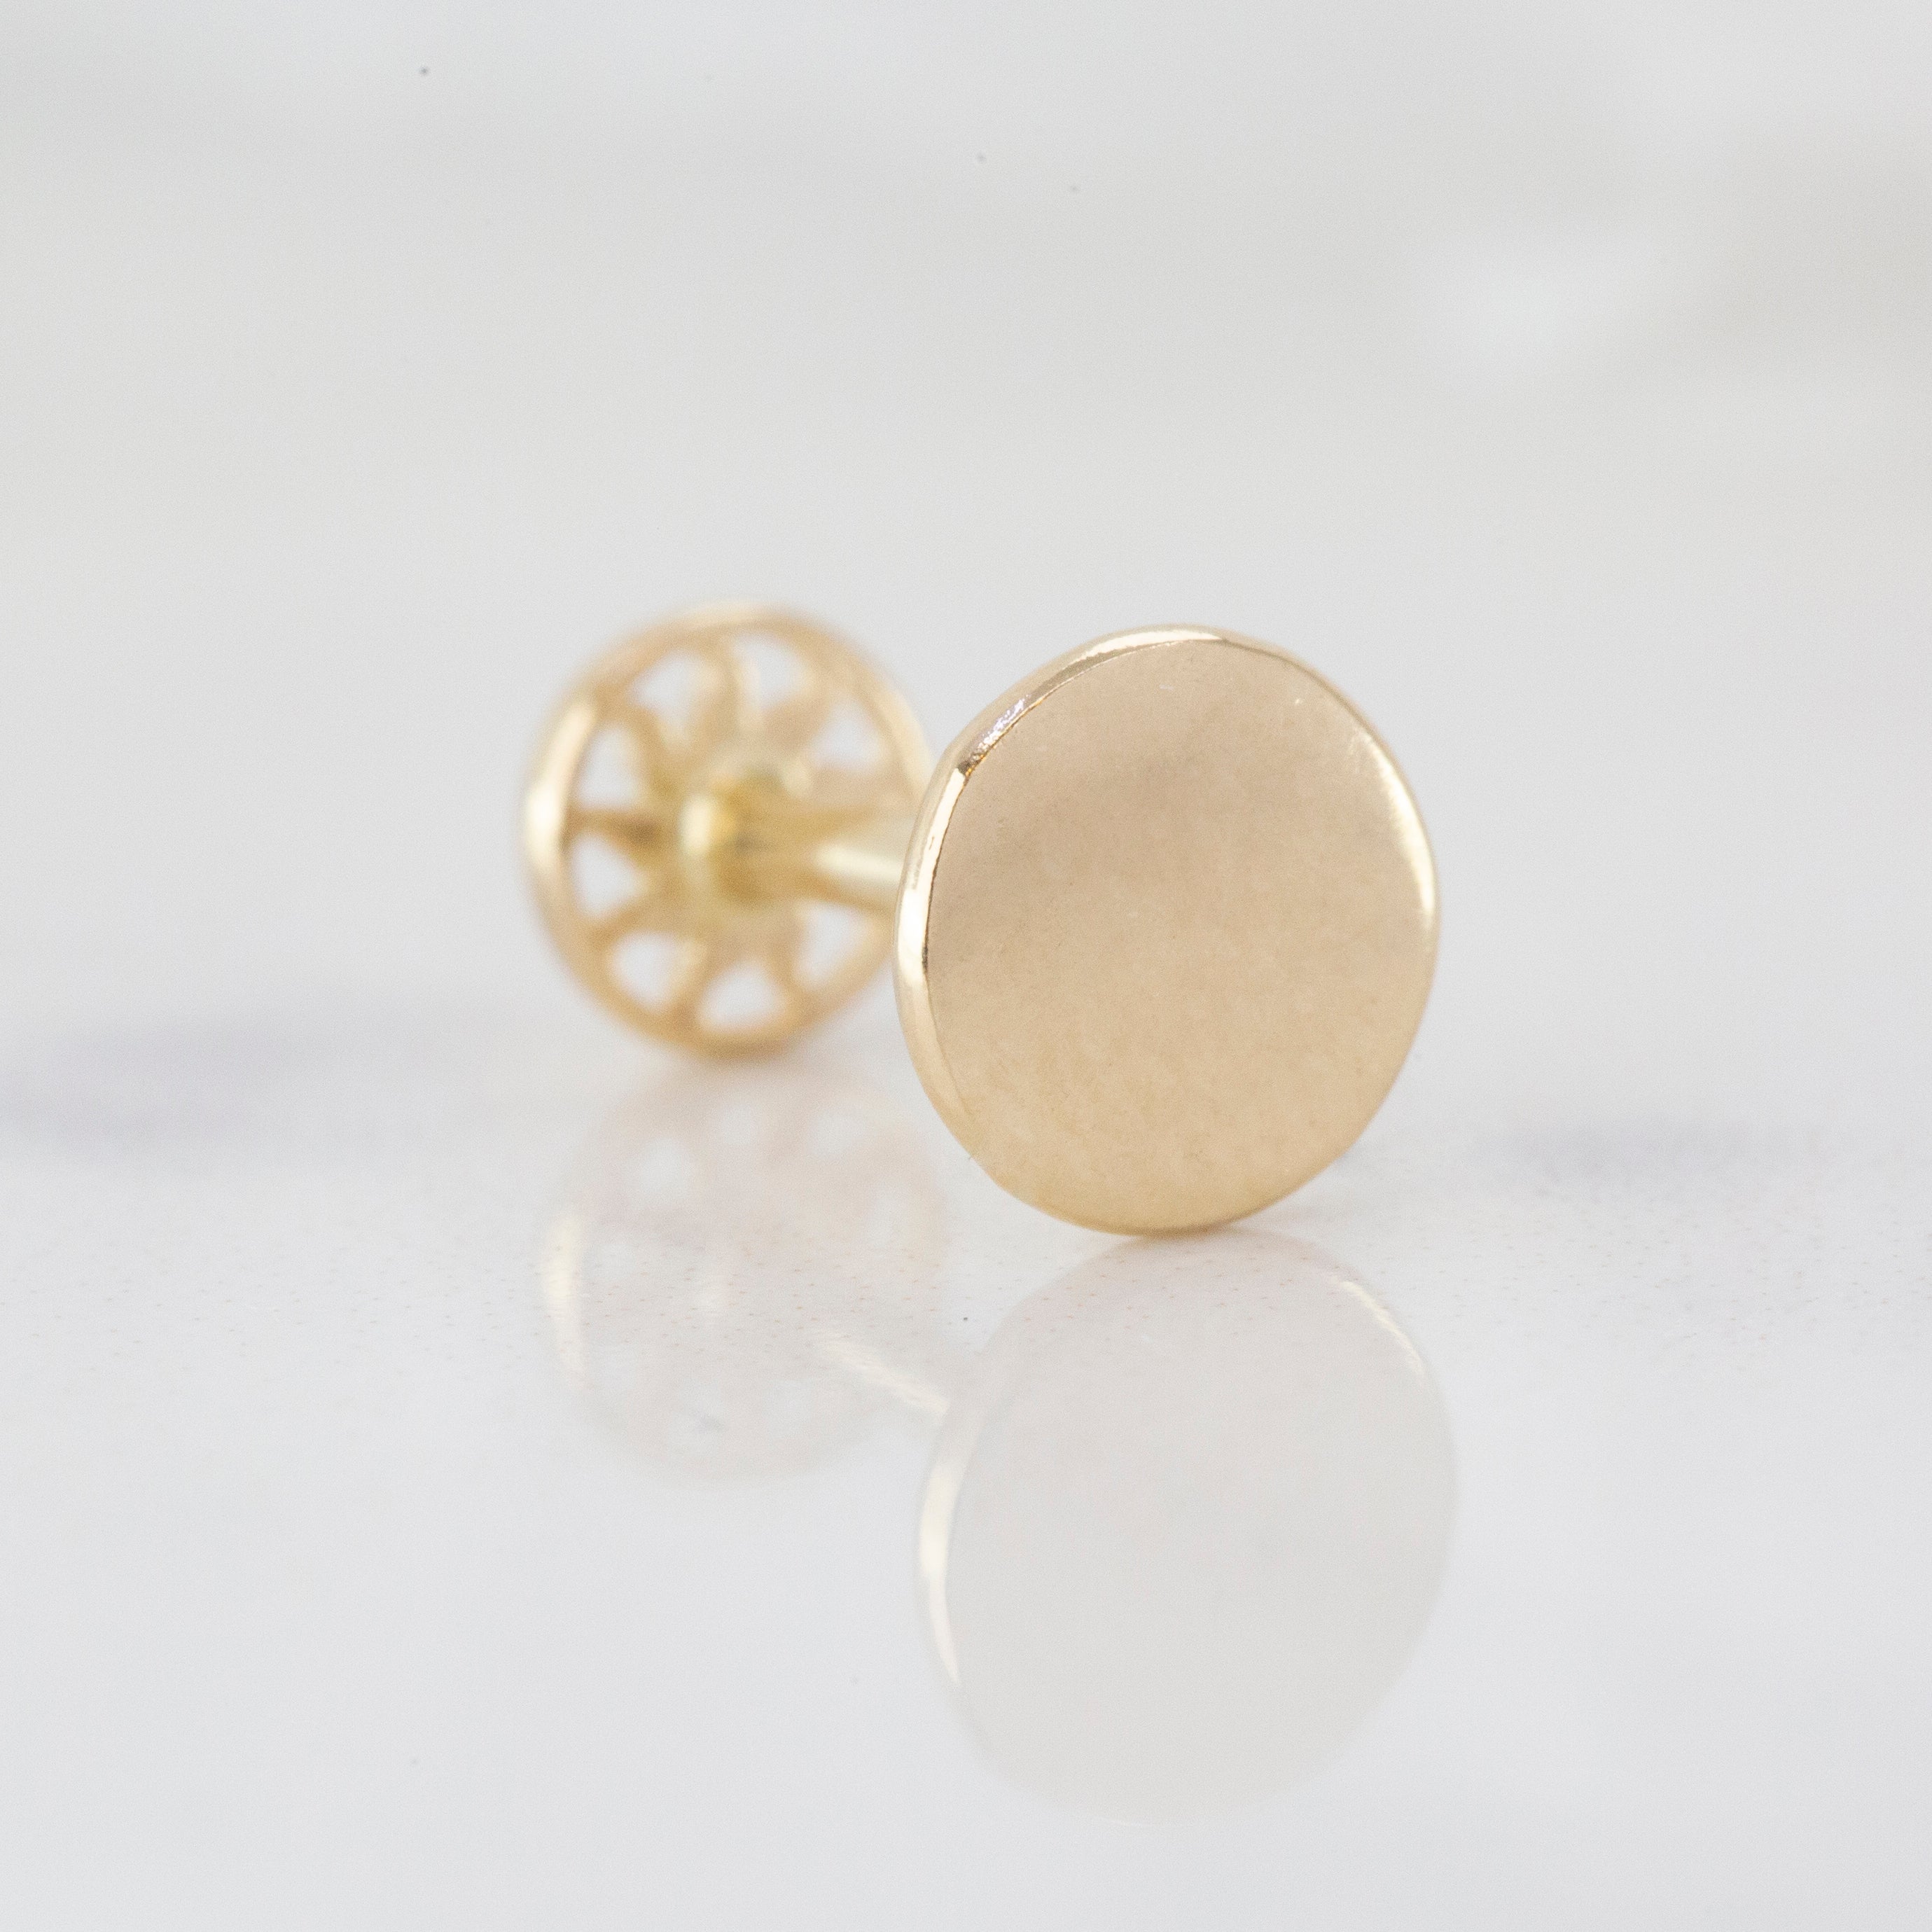 14K Gold Round and Circle Piercing, Gold Stud Earring

You can use the piercing as an earring too! Also this piercing is suitable for tragus, nose, helix, lobe, flat, medusa, monreo, labret and stud.

This piercing was made with quality materials